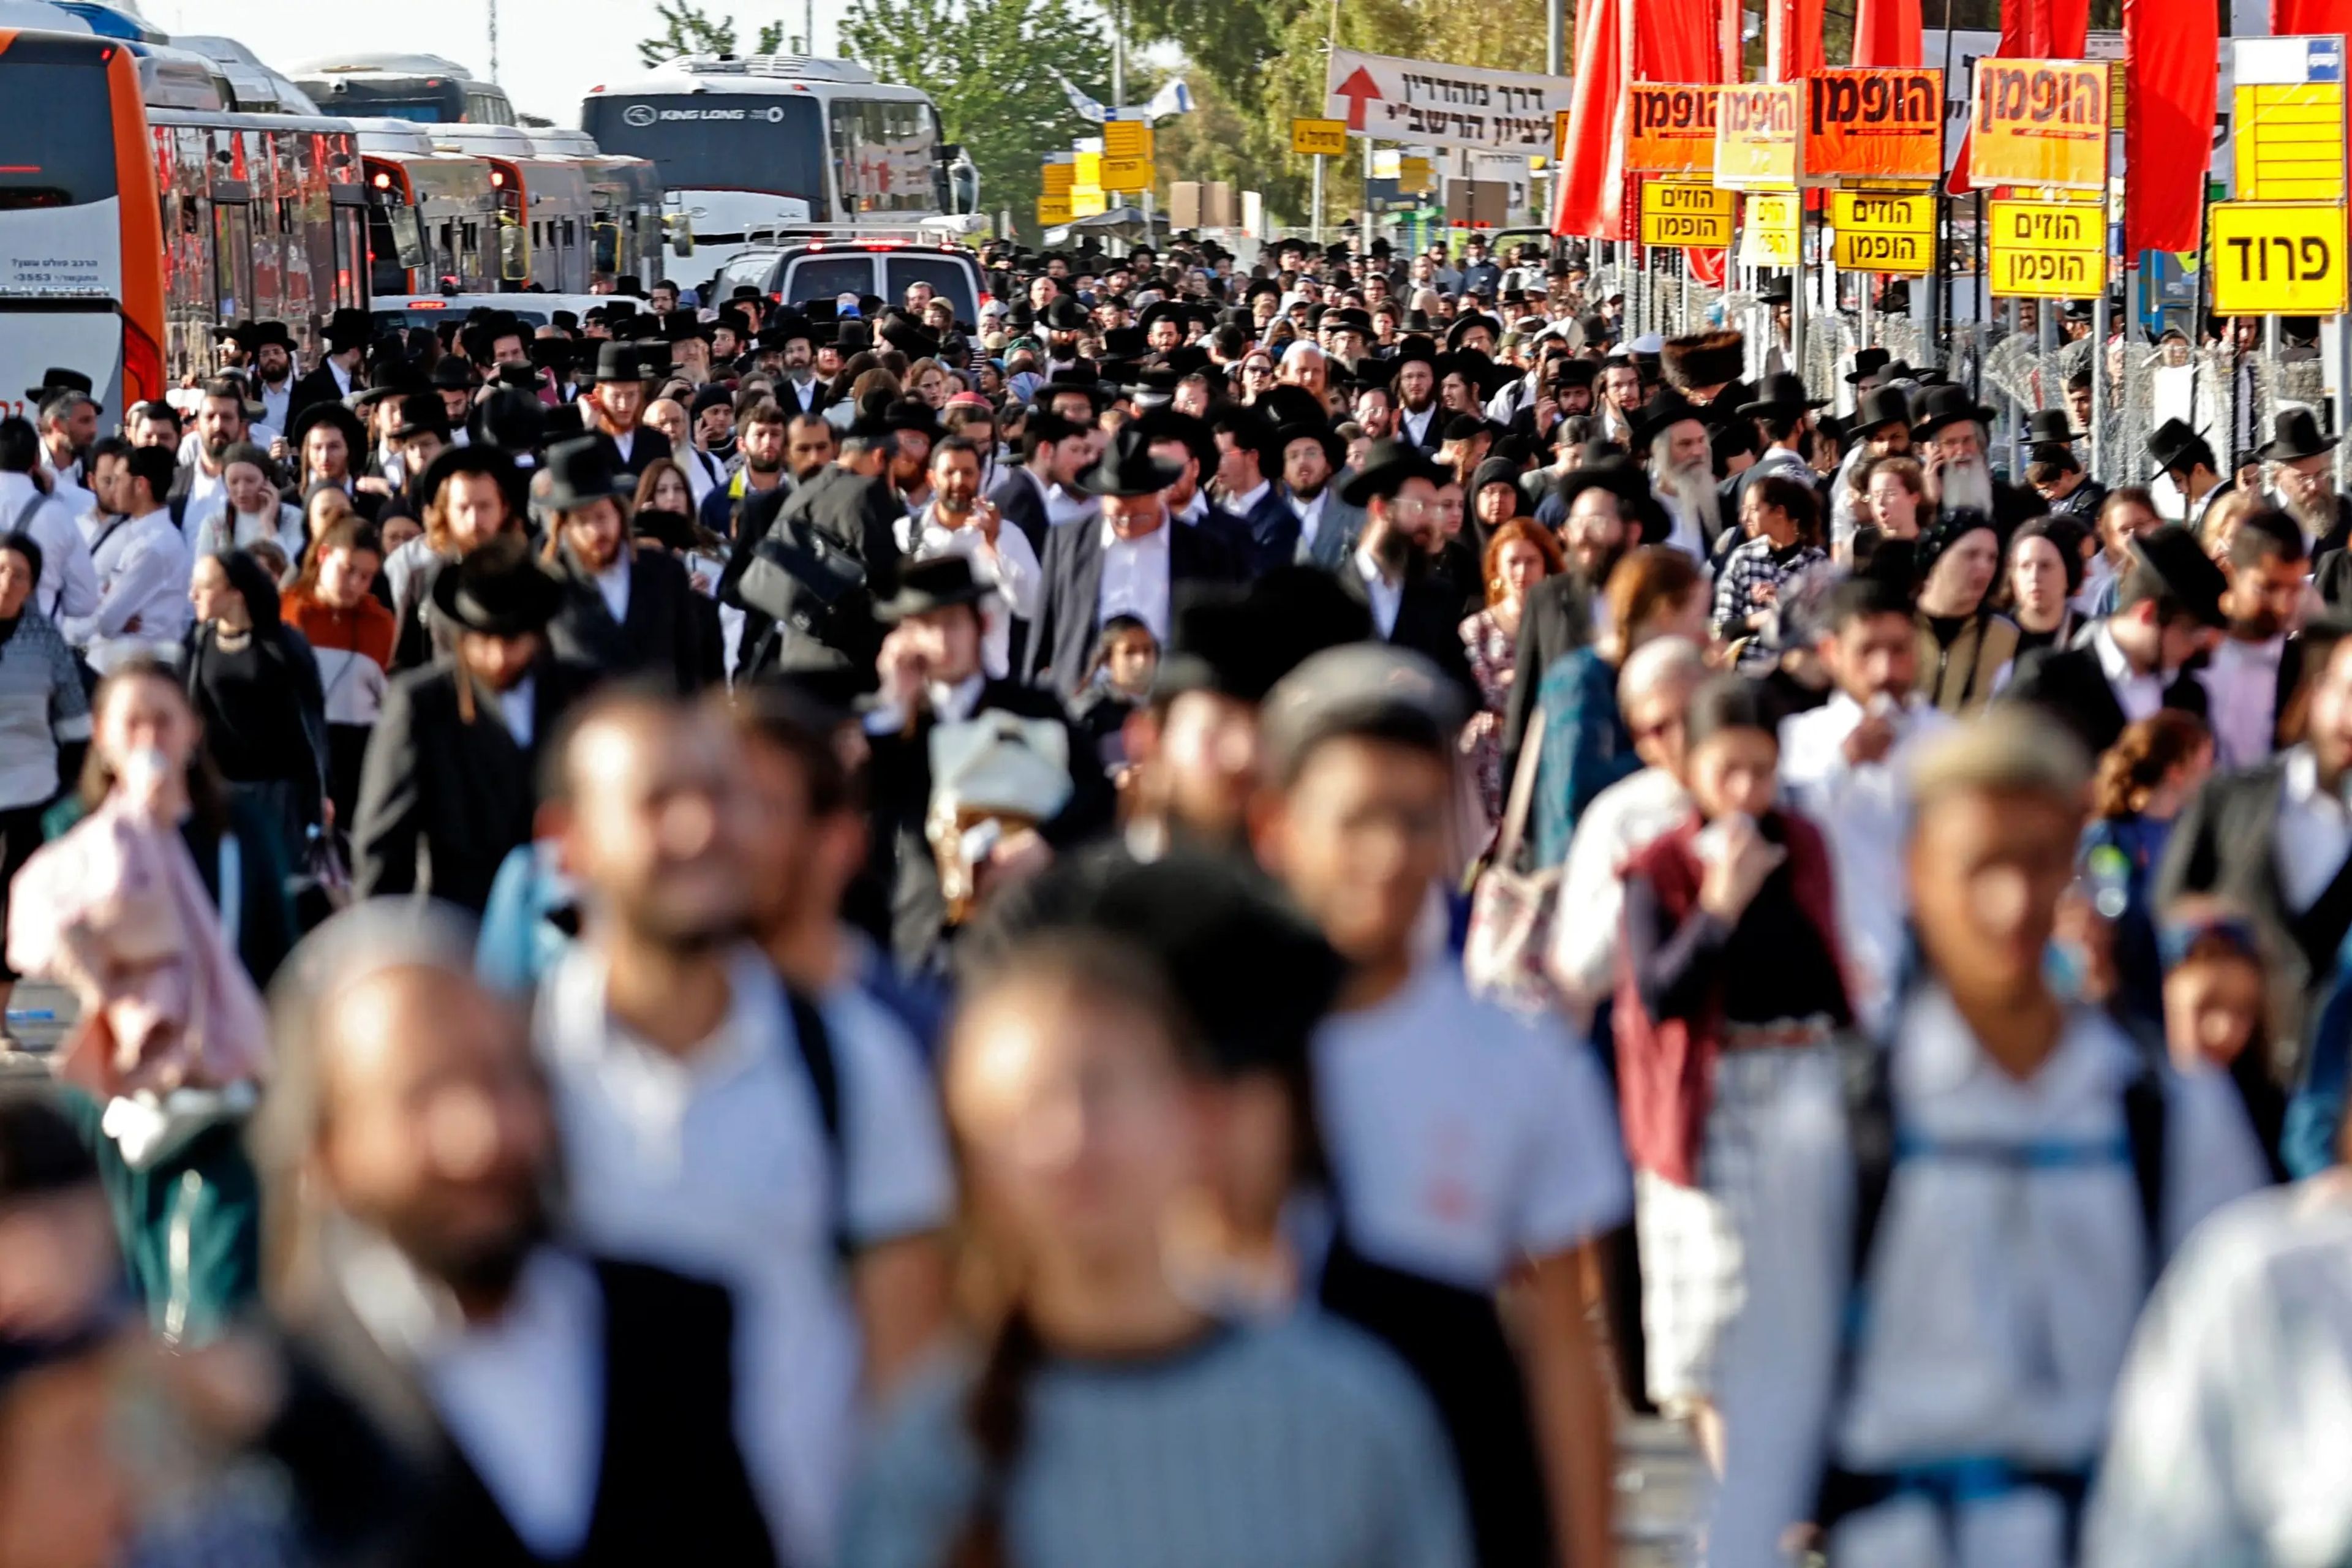 A crowded street in the Israeli town of Meron on April 30, 2021.